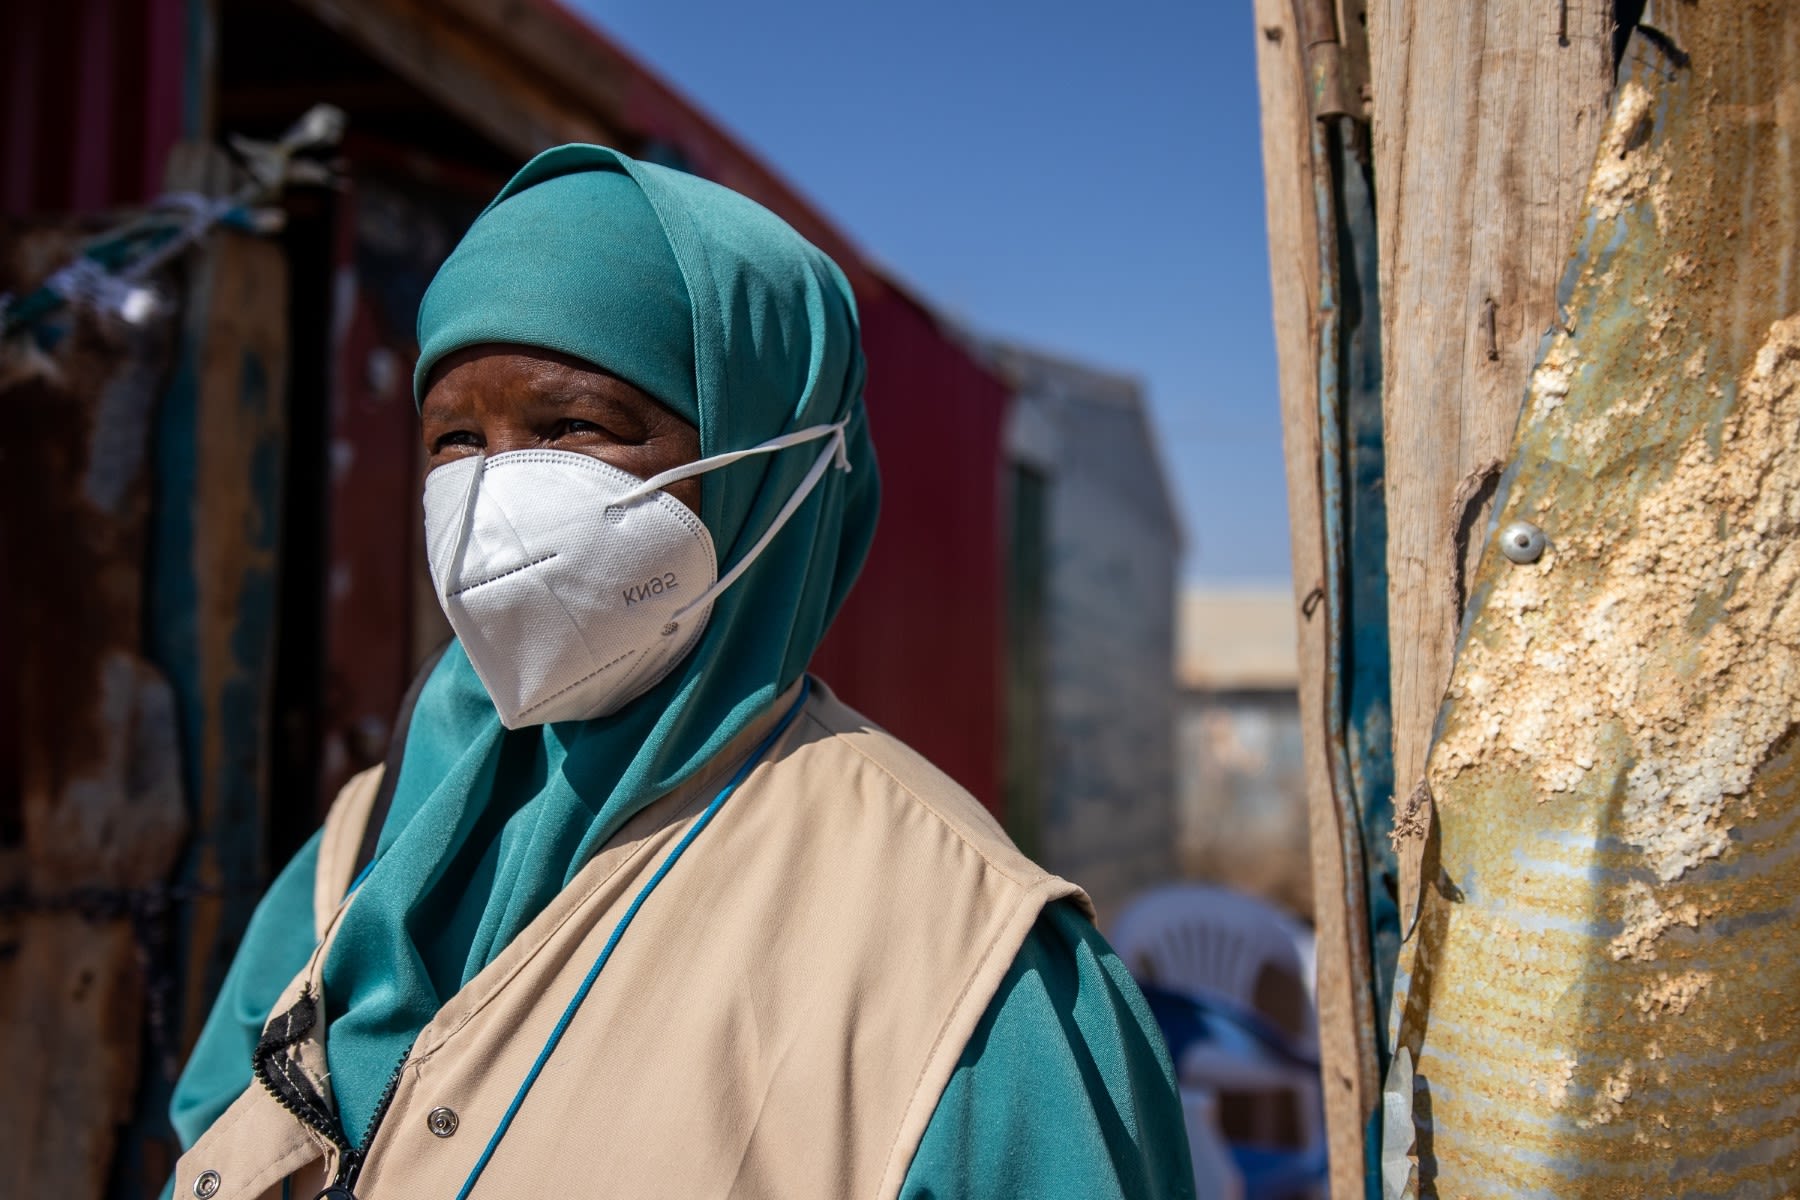 Muna (42) is a Family Health Worker with Save the Children and provides access to healthcare for child living in a camp for displaced people in Somalia